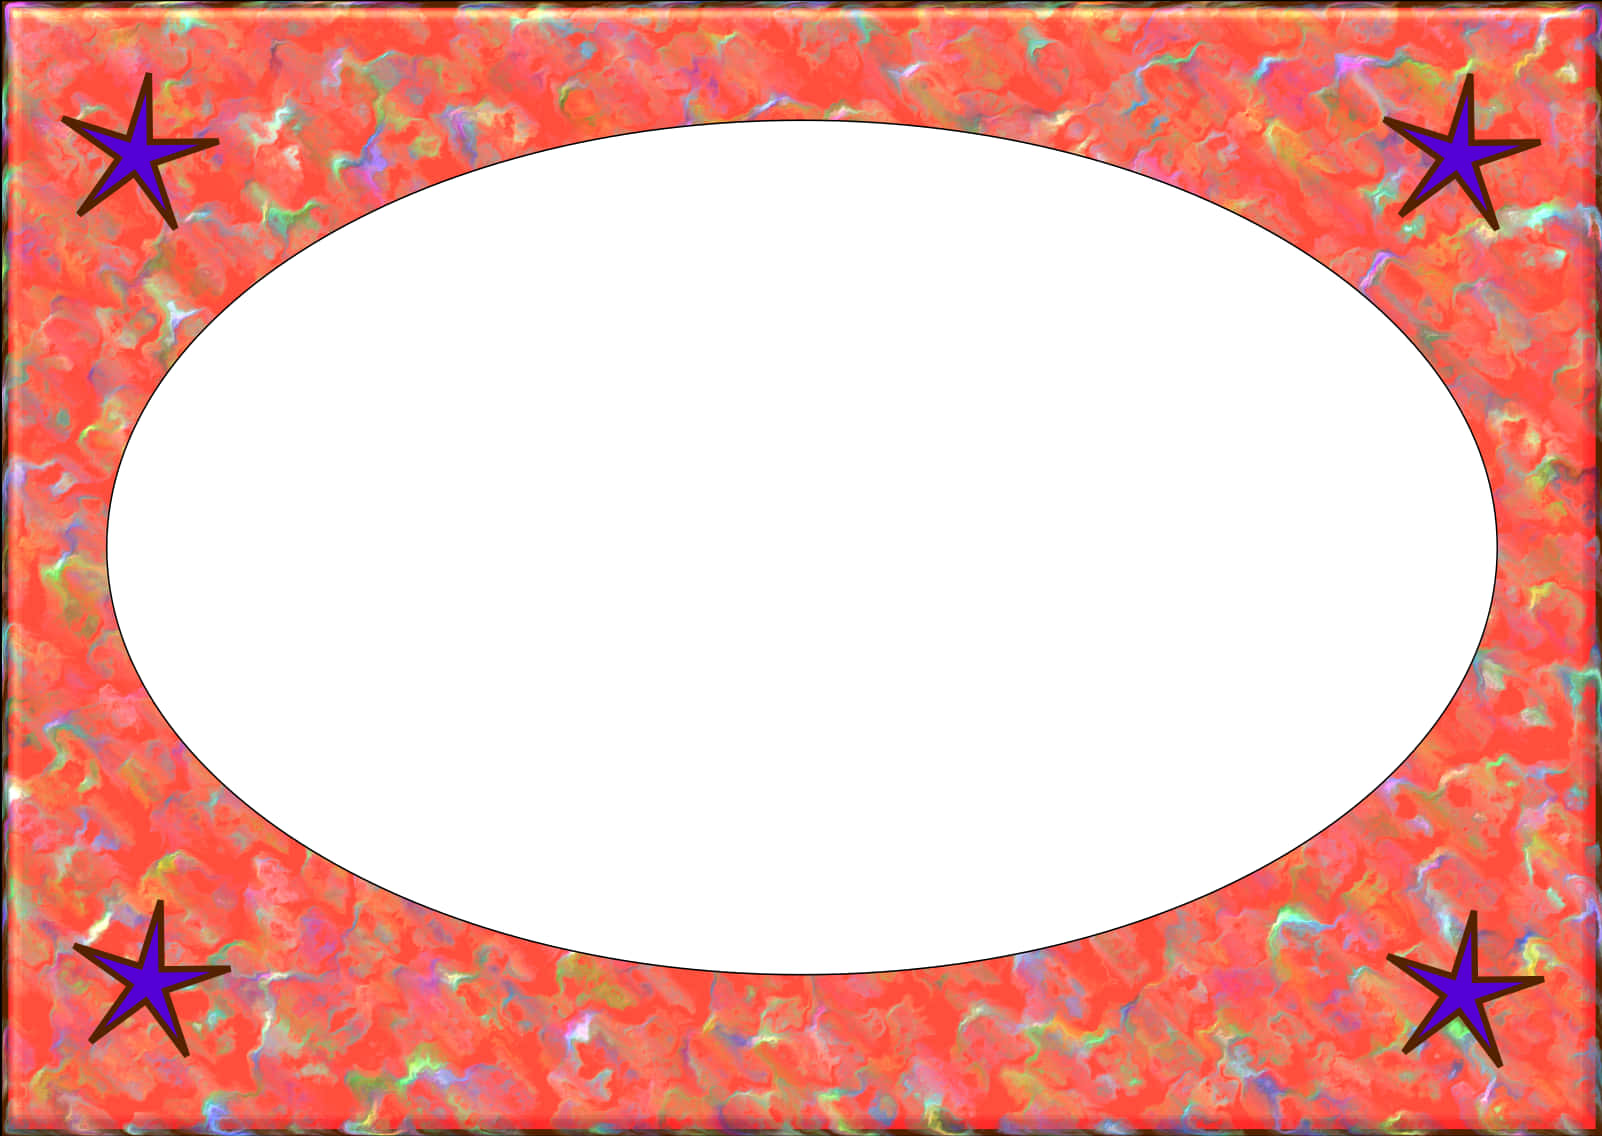 A Red And Blue Frame With A White Oval